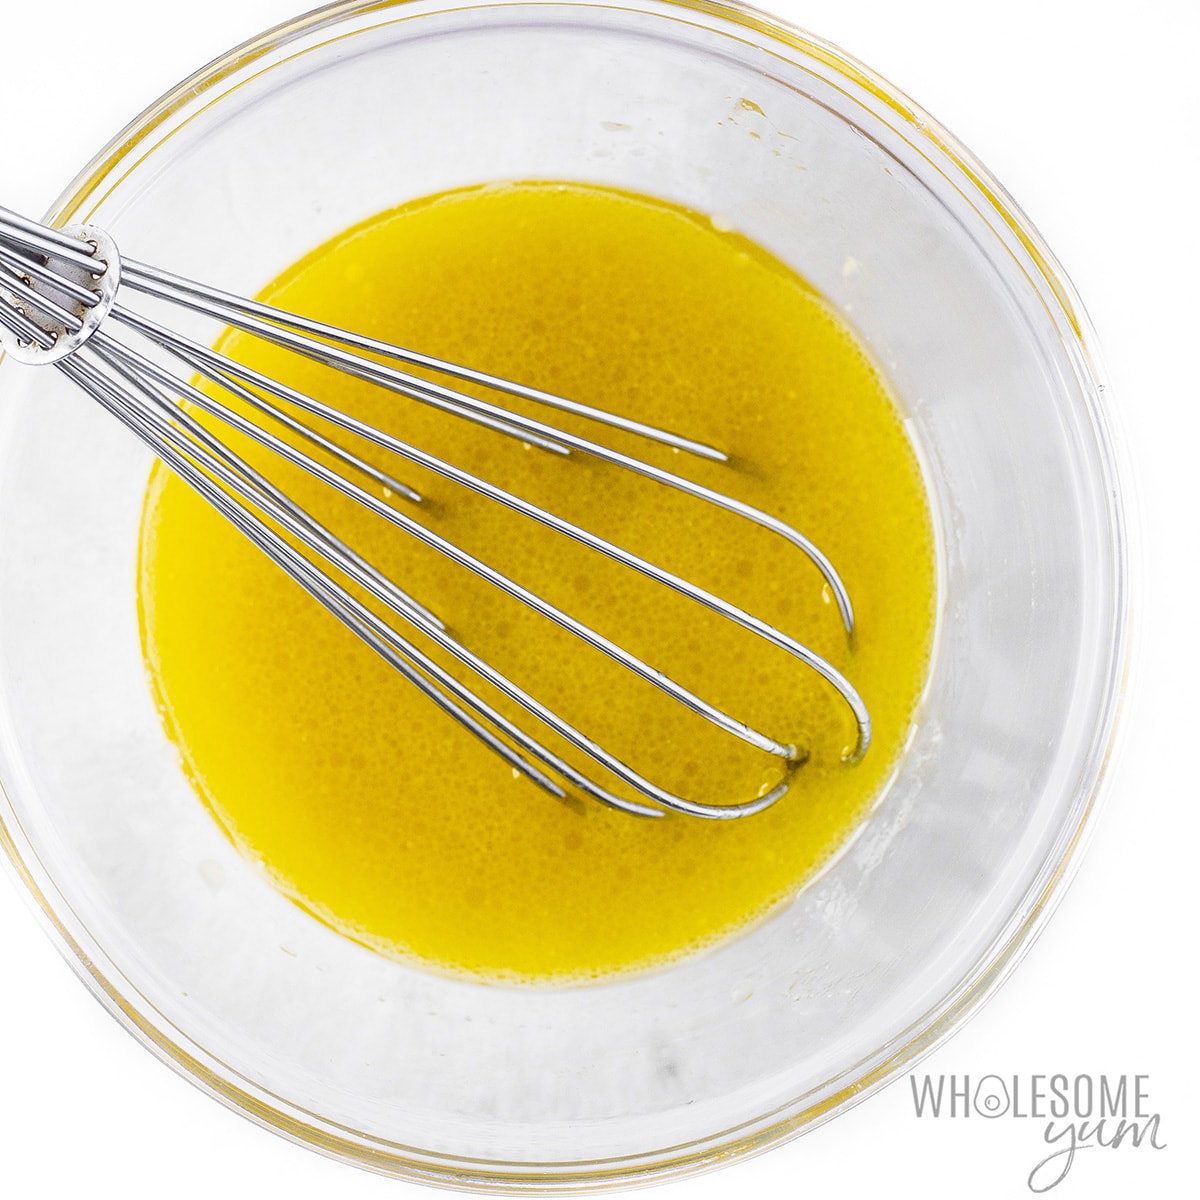 Salad dressing whisked in a bowl